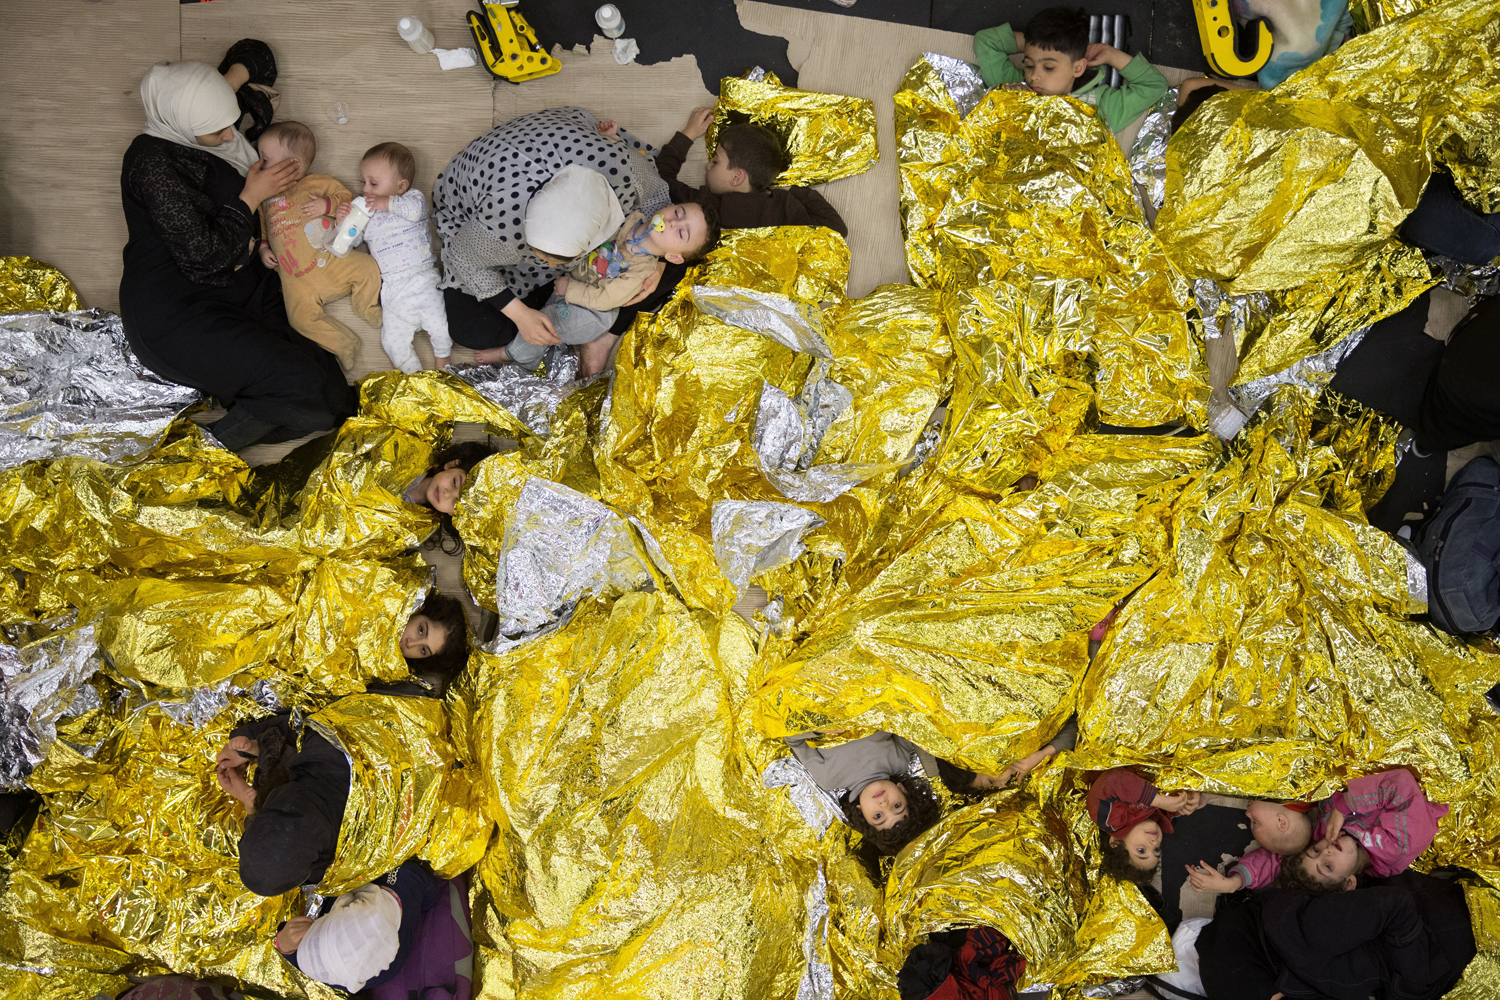 Syrian refugees sleeping on an Italian navy ship after being rescued from a fishing vessel carrying 443 Syrian asylum seekers, June 5, 2014. (Massimo Sestini—Polaris)